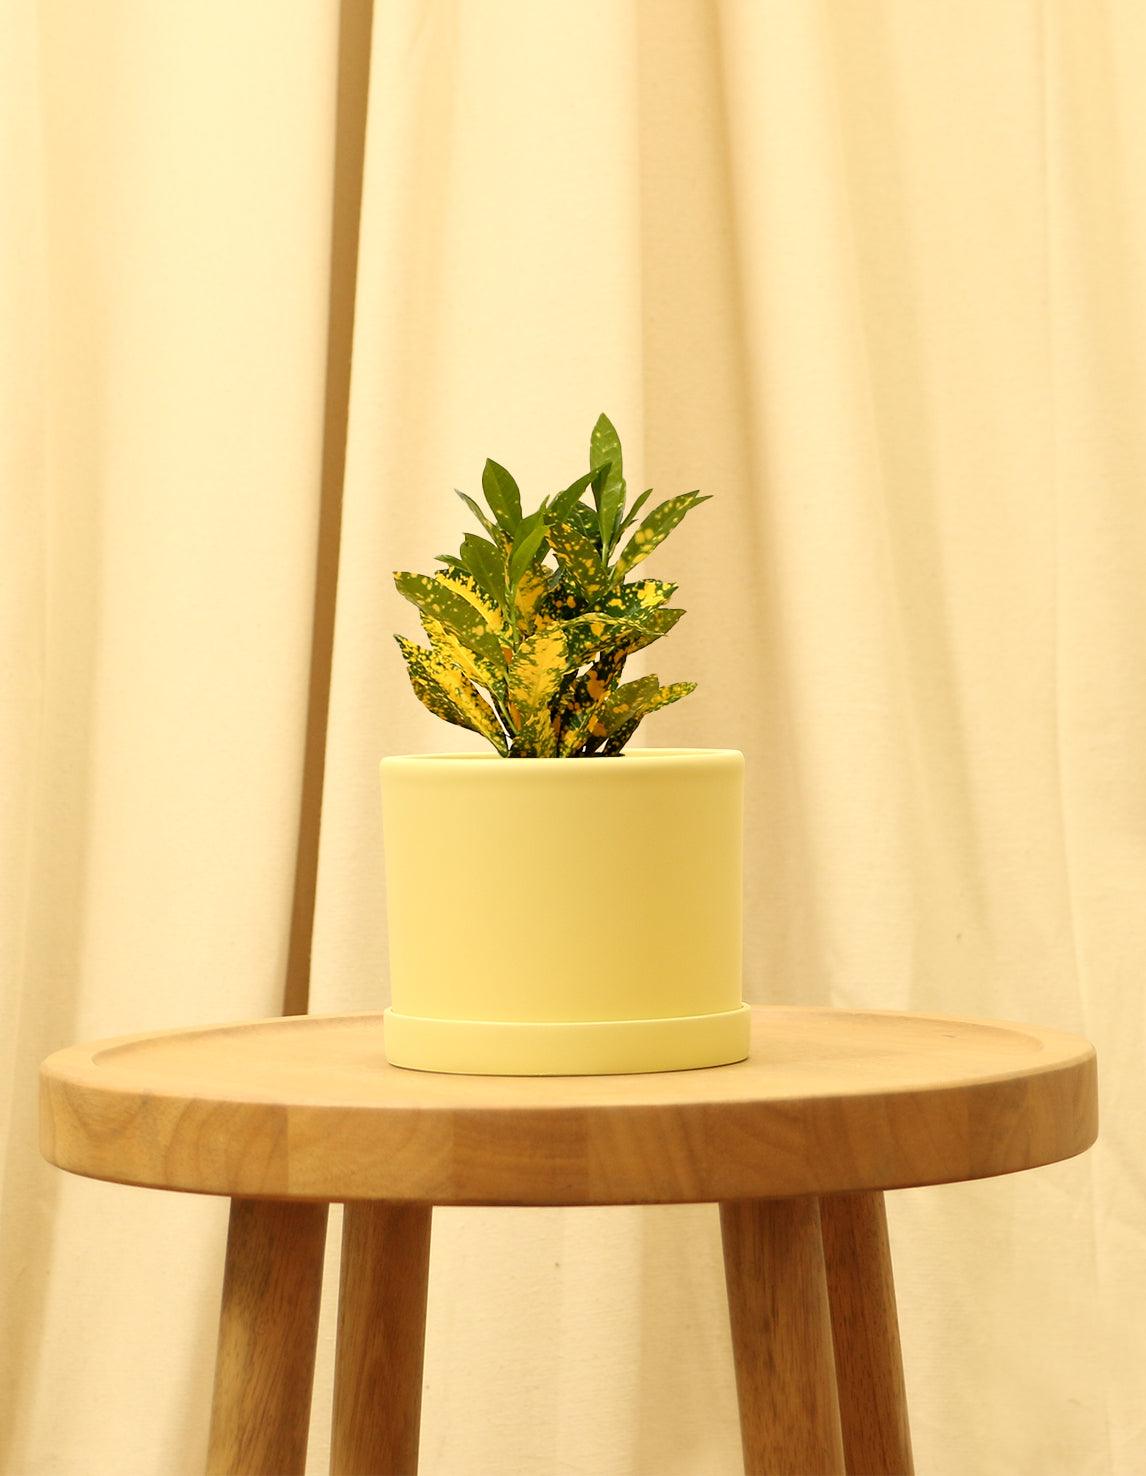 Small Japanese Laurel in yellow pot.